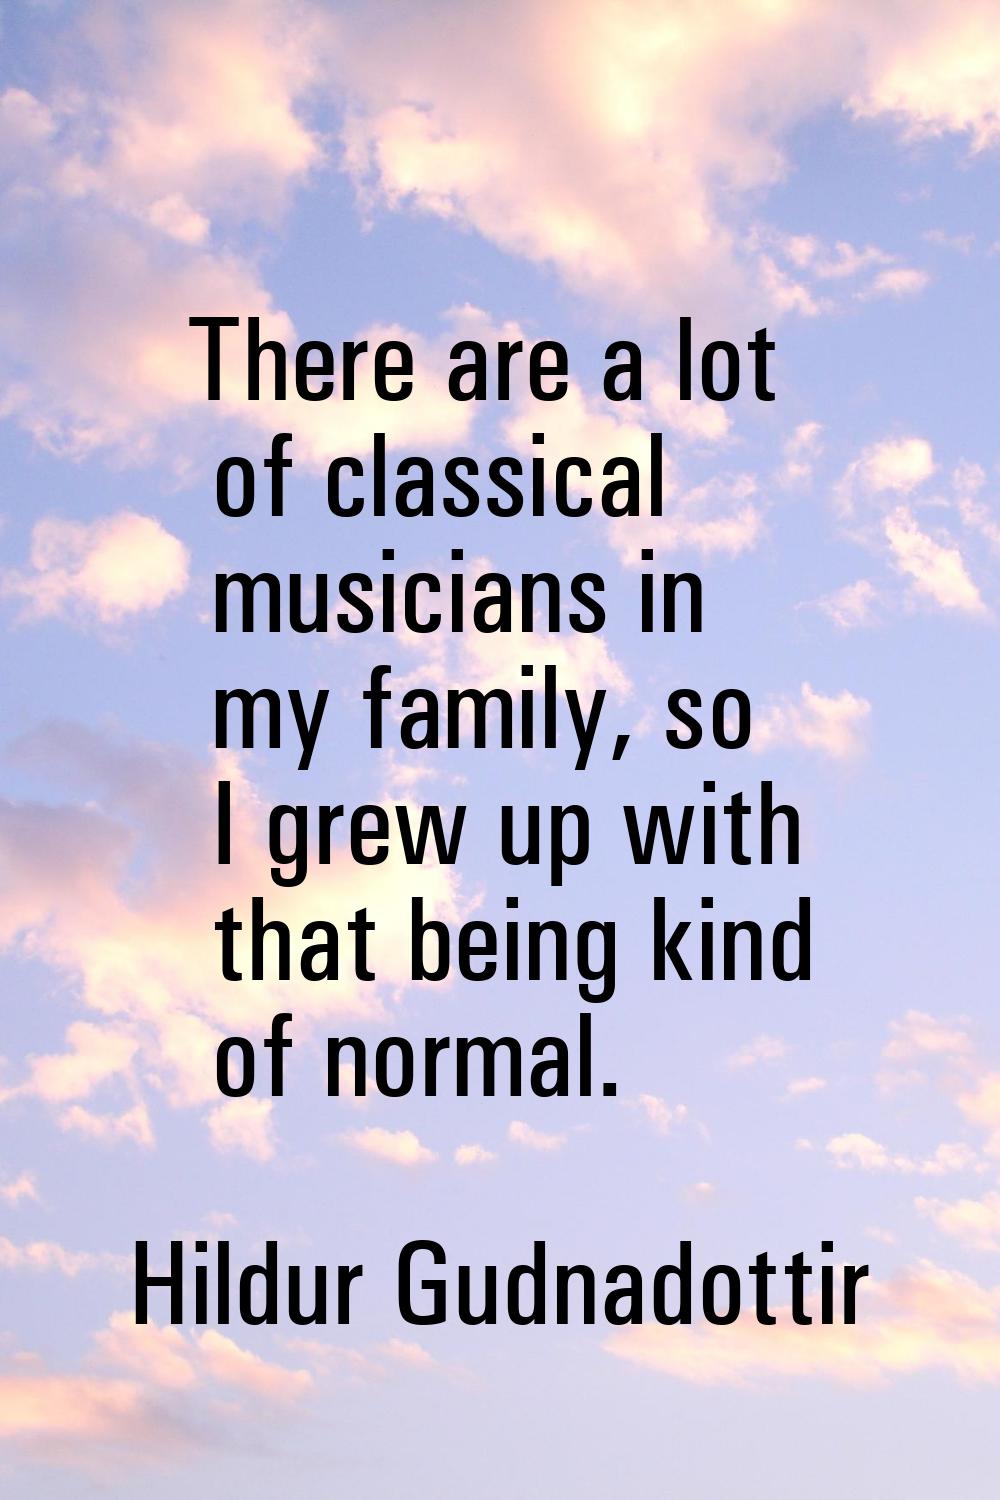 There are a lot of classical musicians in my family, so I grew up with that being kind of normal.